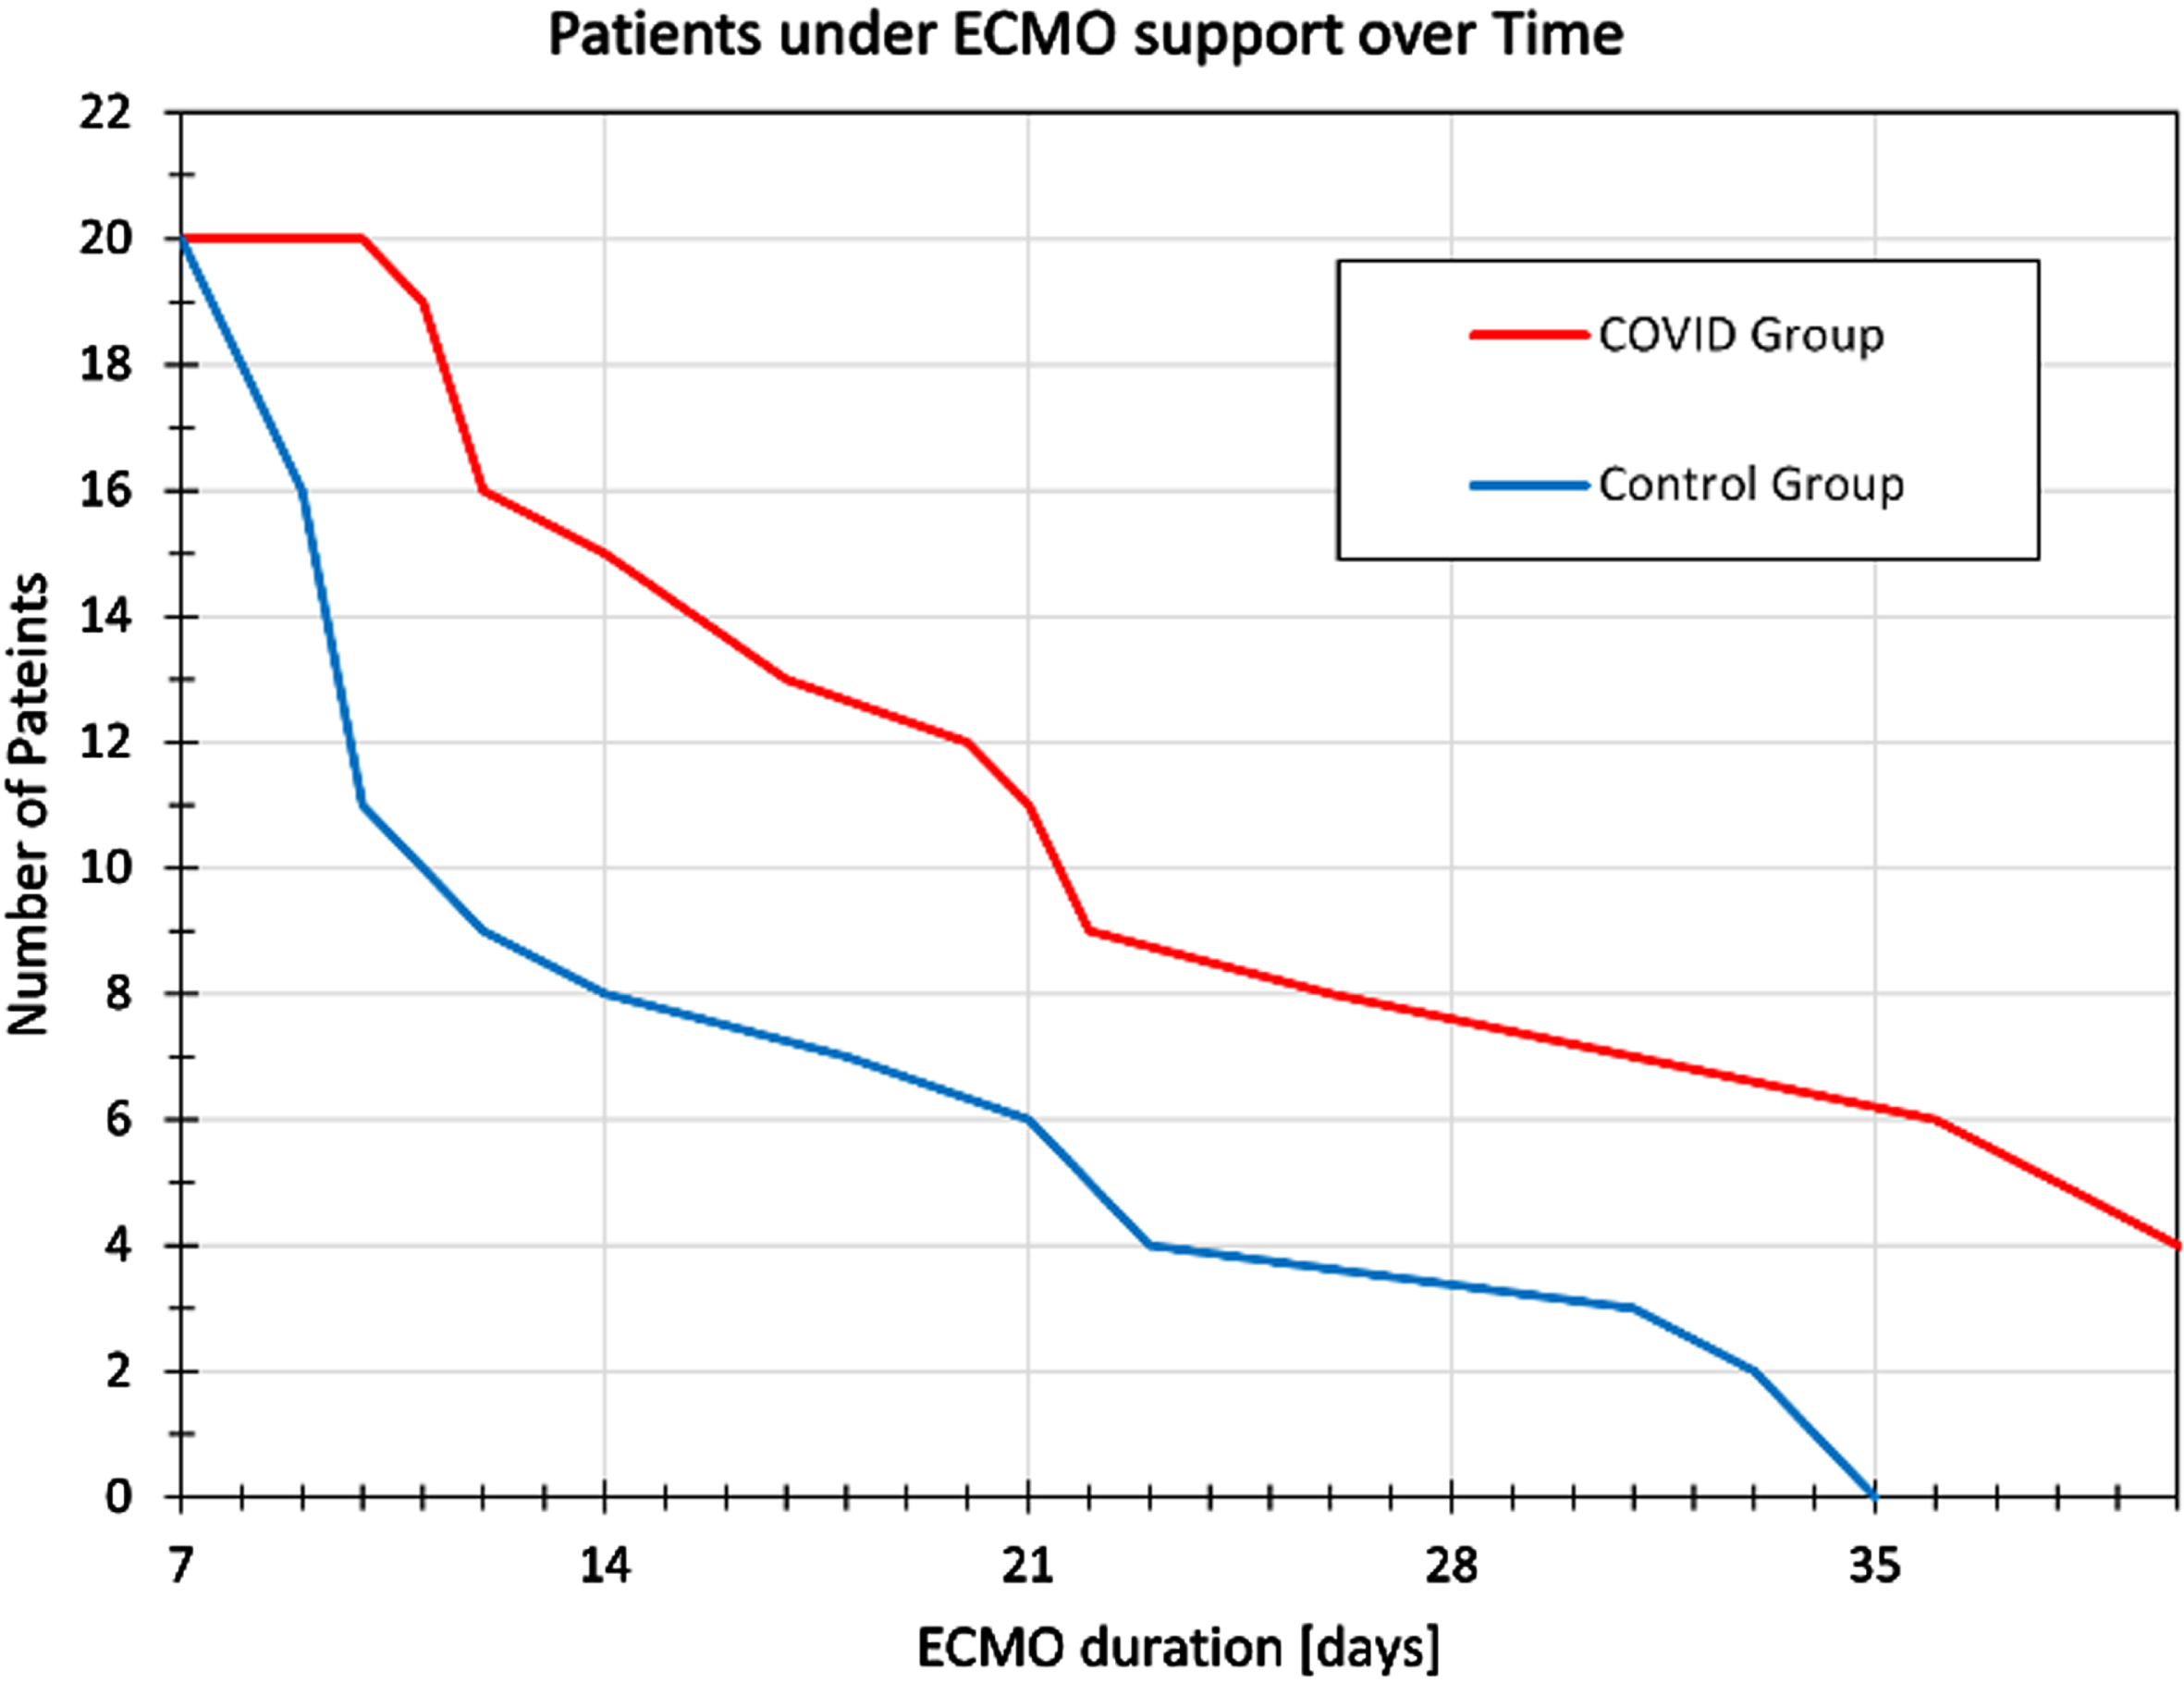 Number of patients supported by EMCO over time. In the COIVD-19 group the longest support time is up to 94 days.